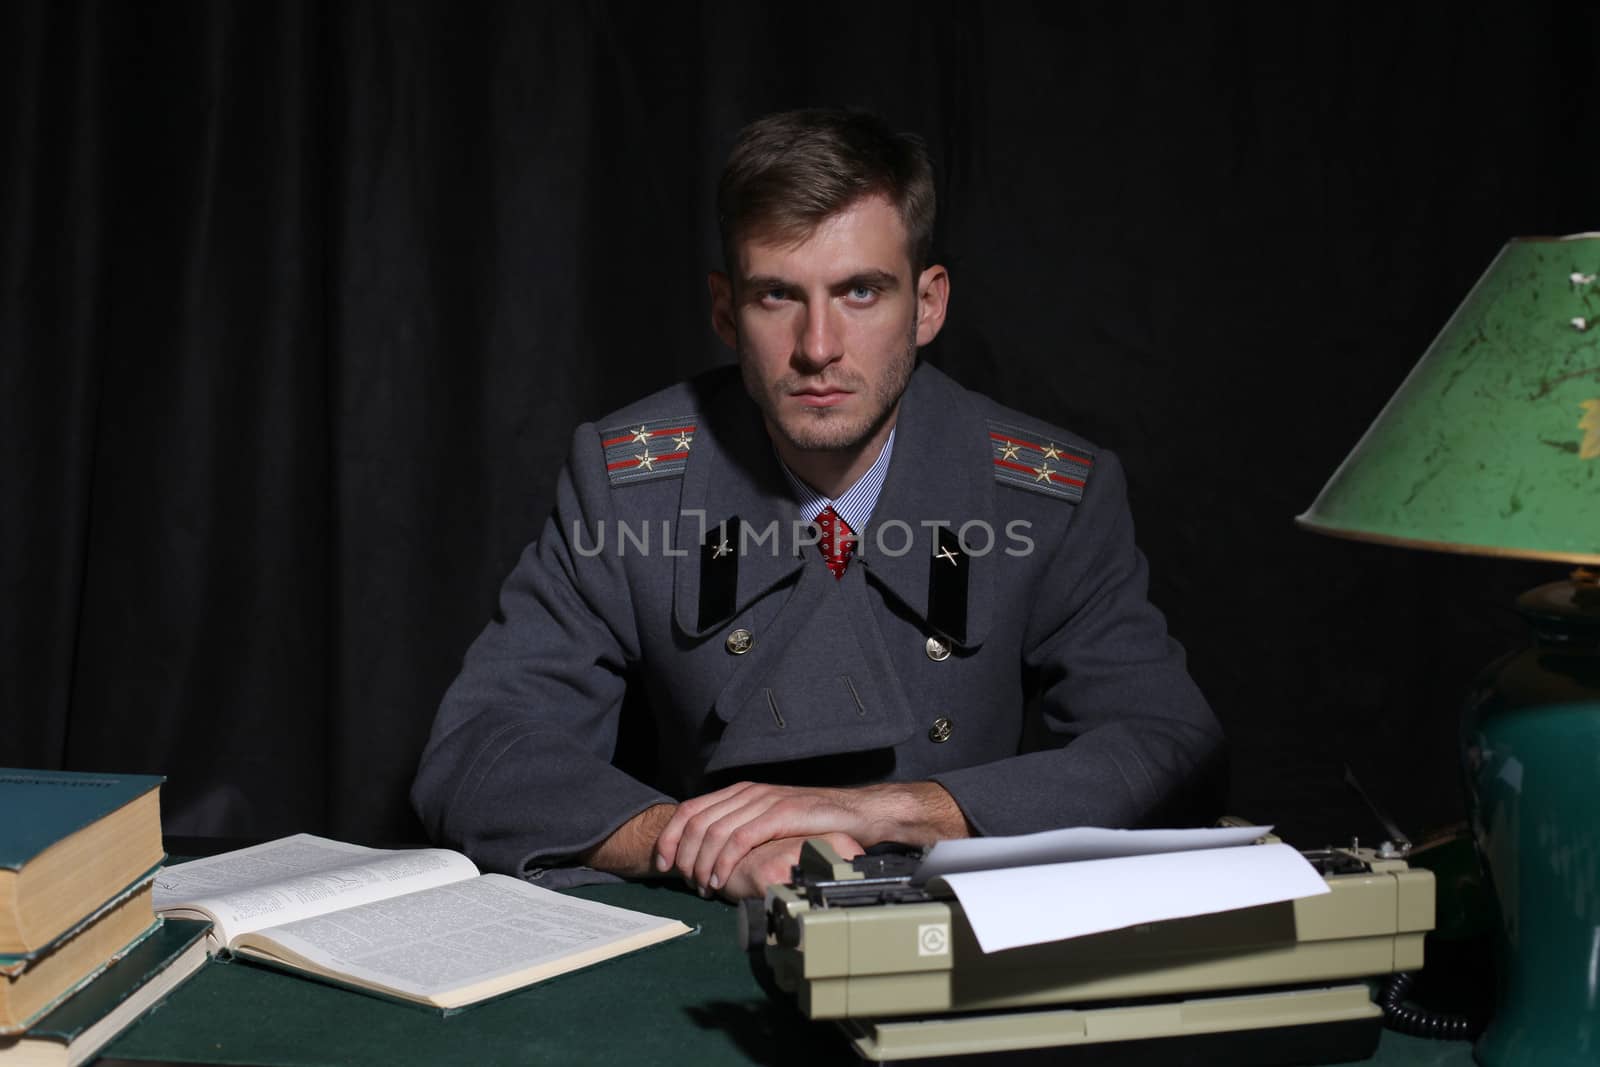 Russian military officer in a dark cabinet